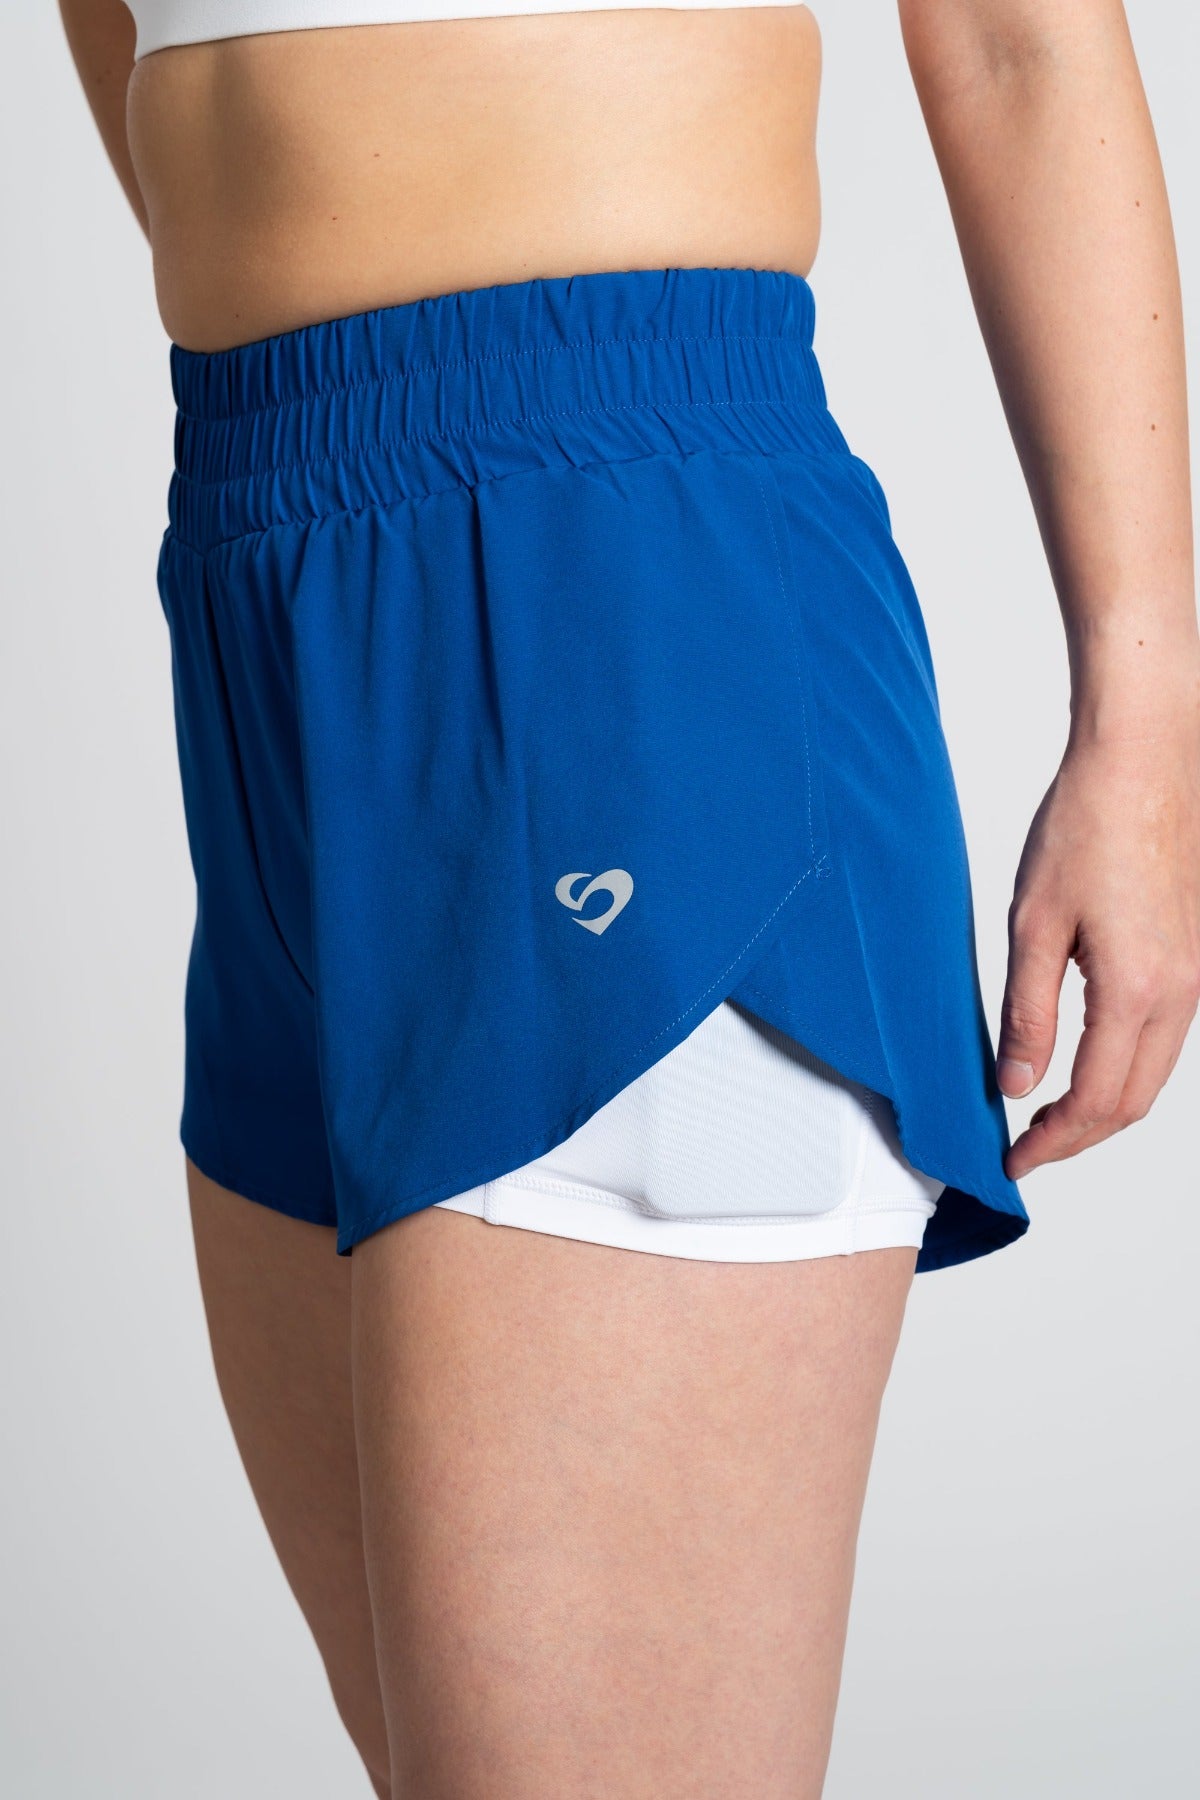 2 in 1 Shorts Blue with white tights, 2 side pockets